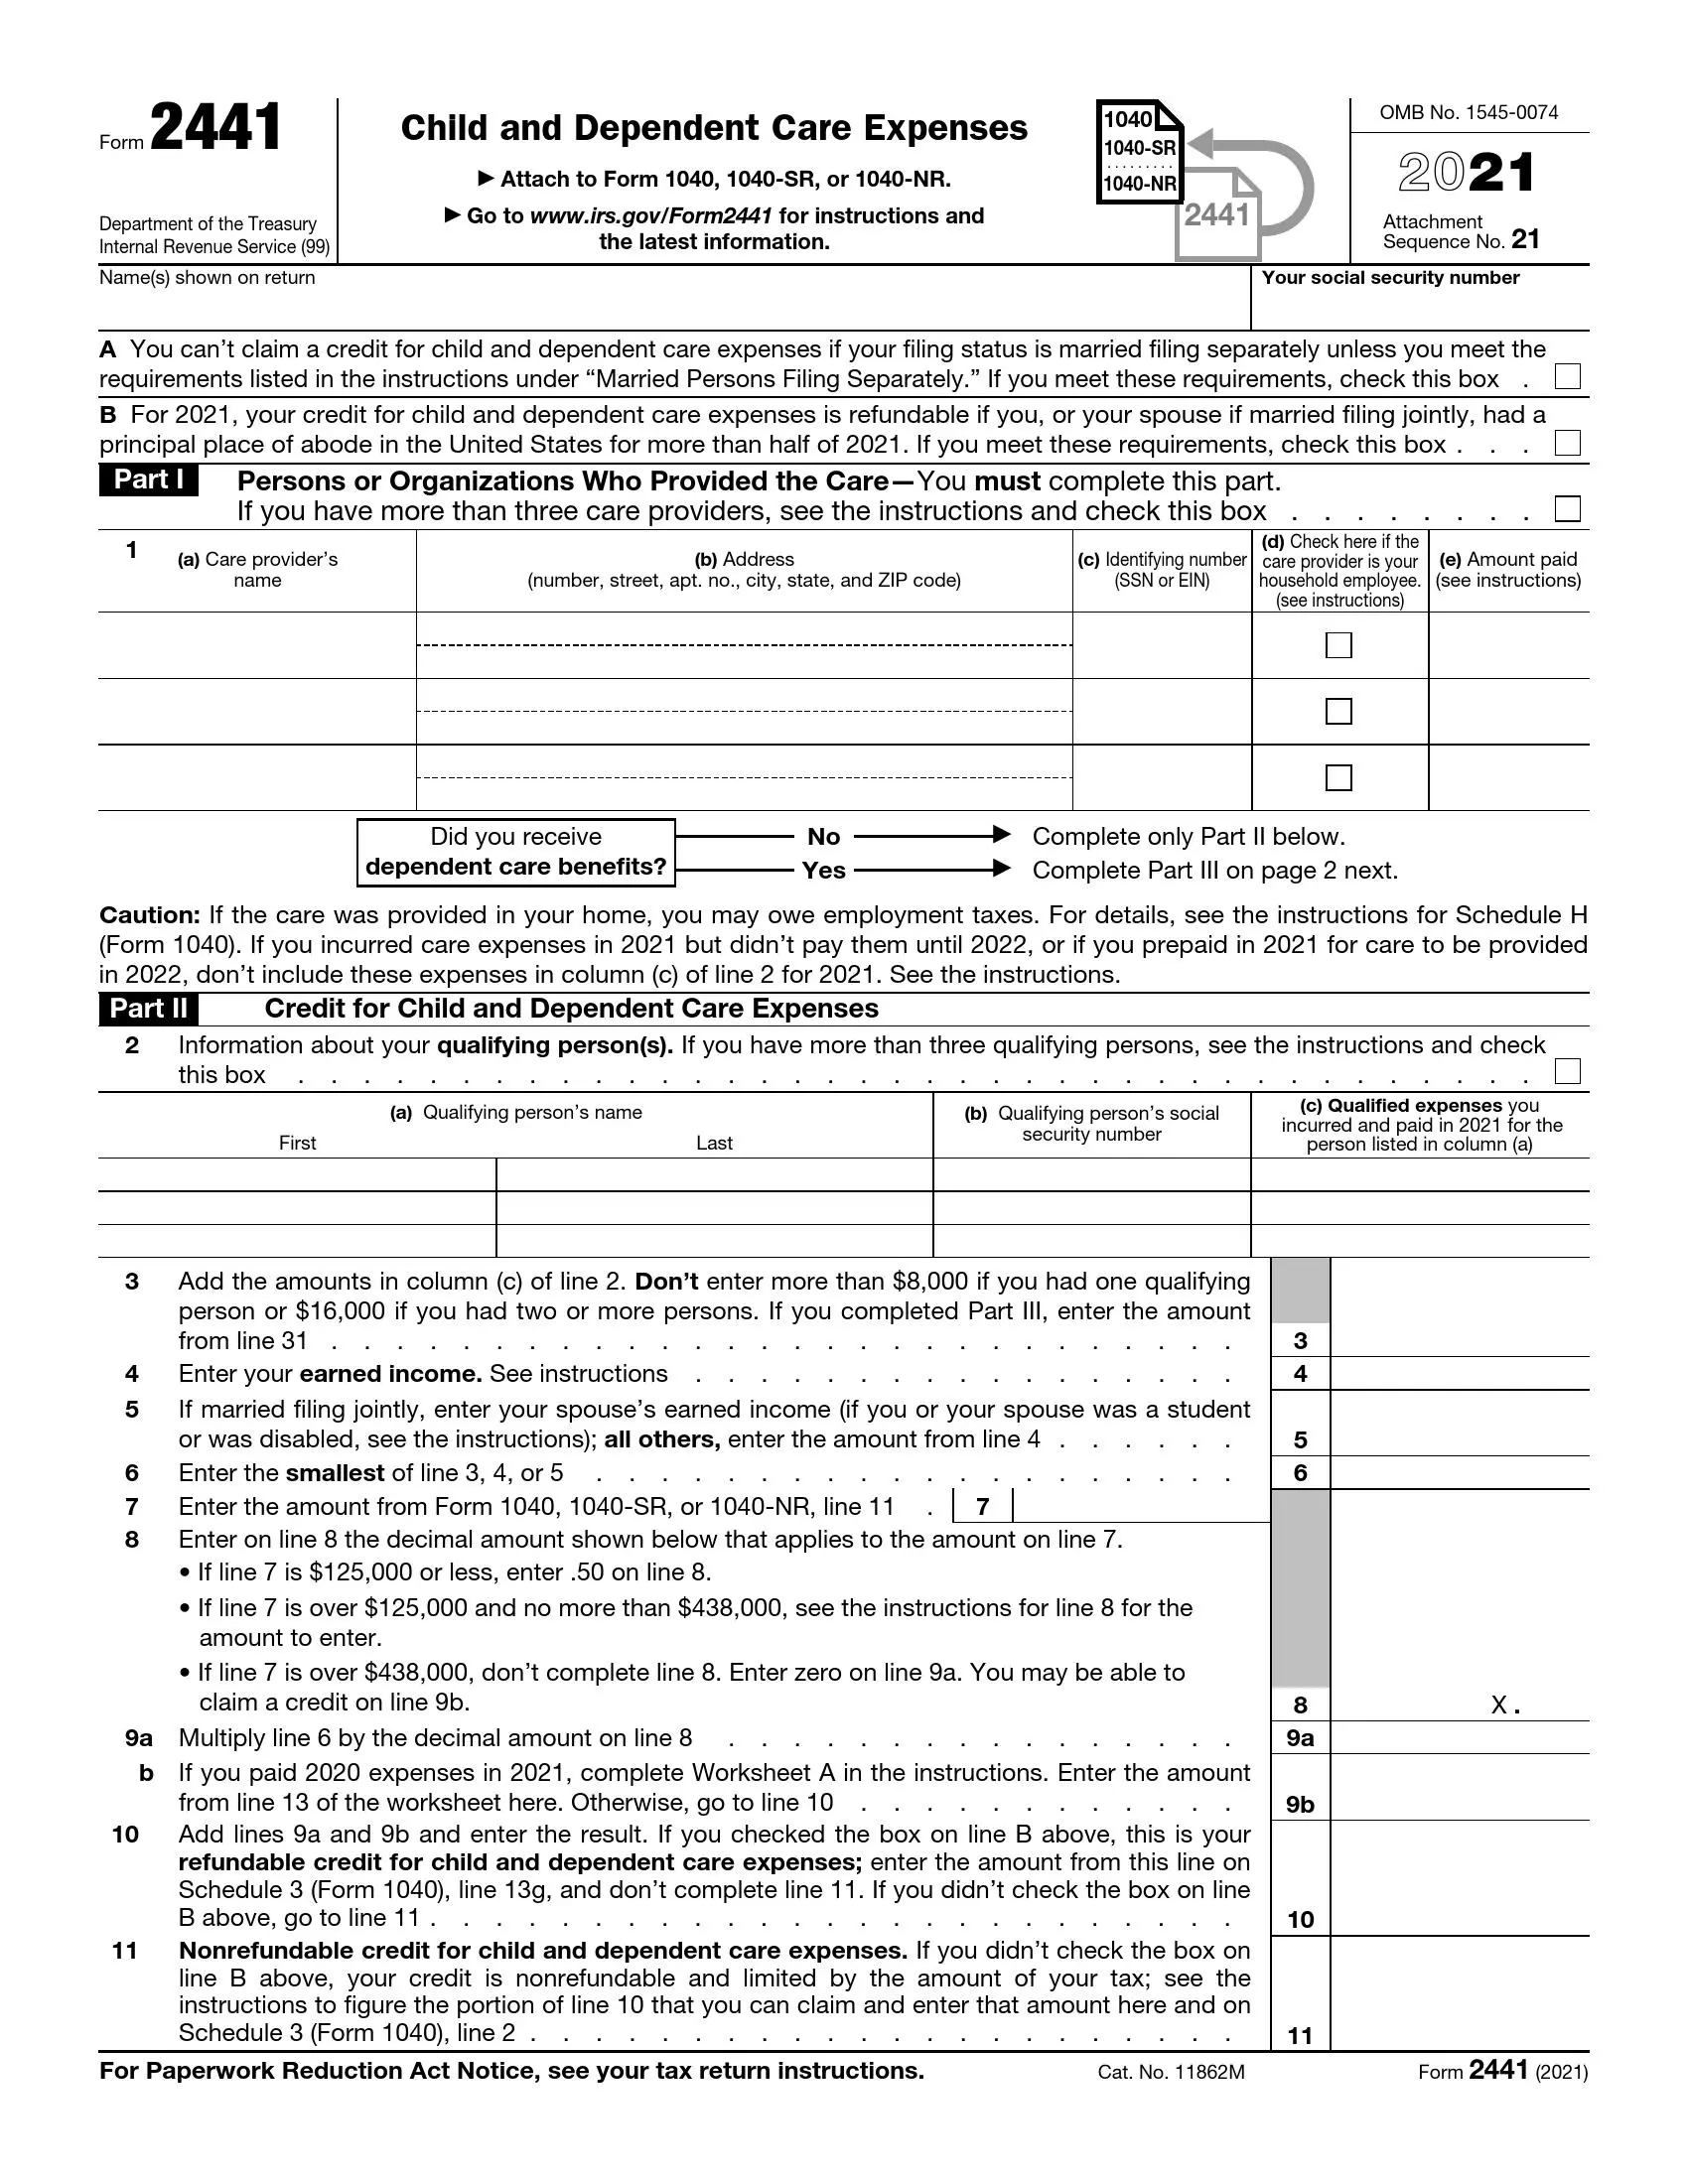 irs form 2441 2021 preview